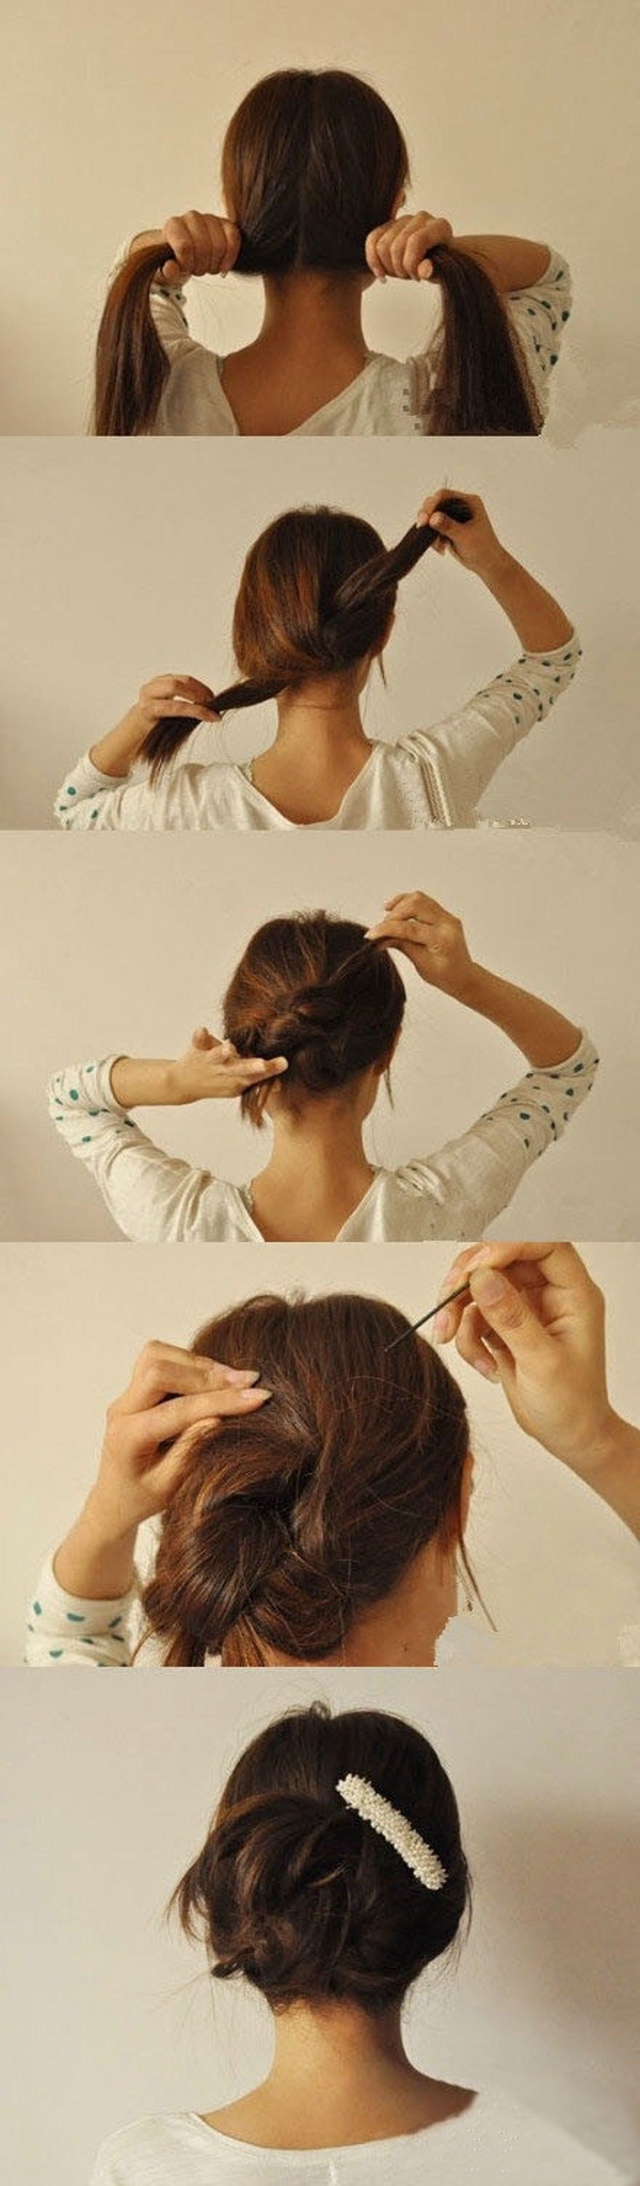 Lazy Girl Hairstyling Hacks